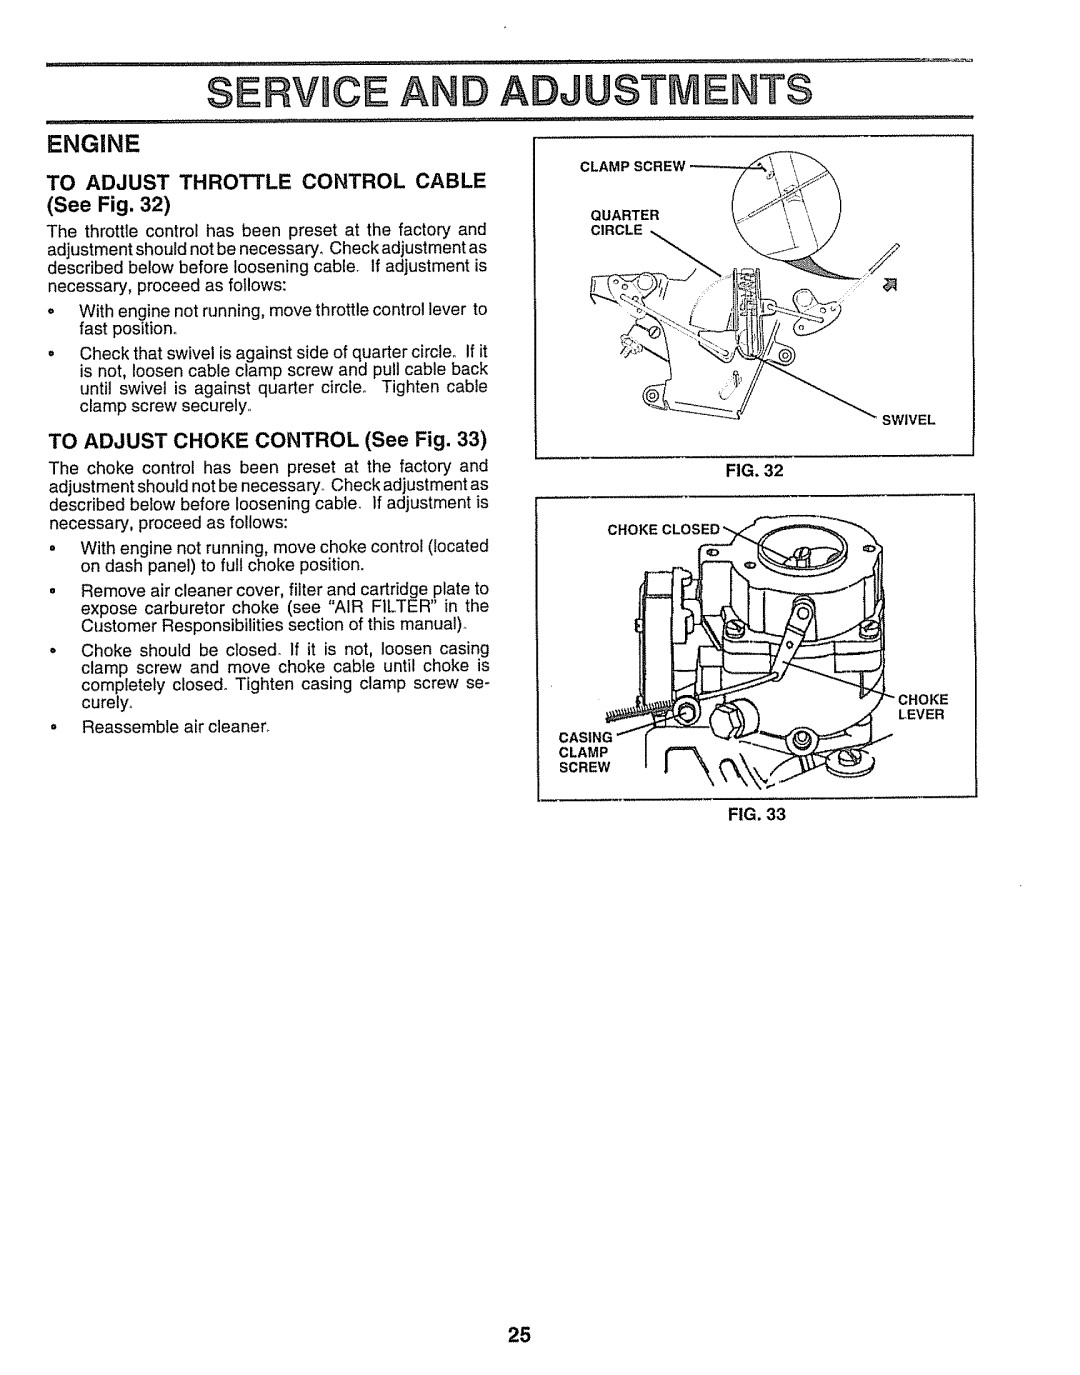 Craftsman 917.259172 SERVnCE AND ADJUSTMENTS, Engine, To Adjust Throttle Control Cable, TO ADJUST CHOKE CONTROL See Fig 